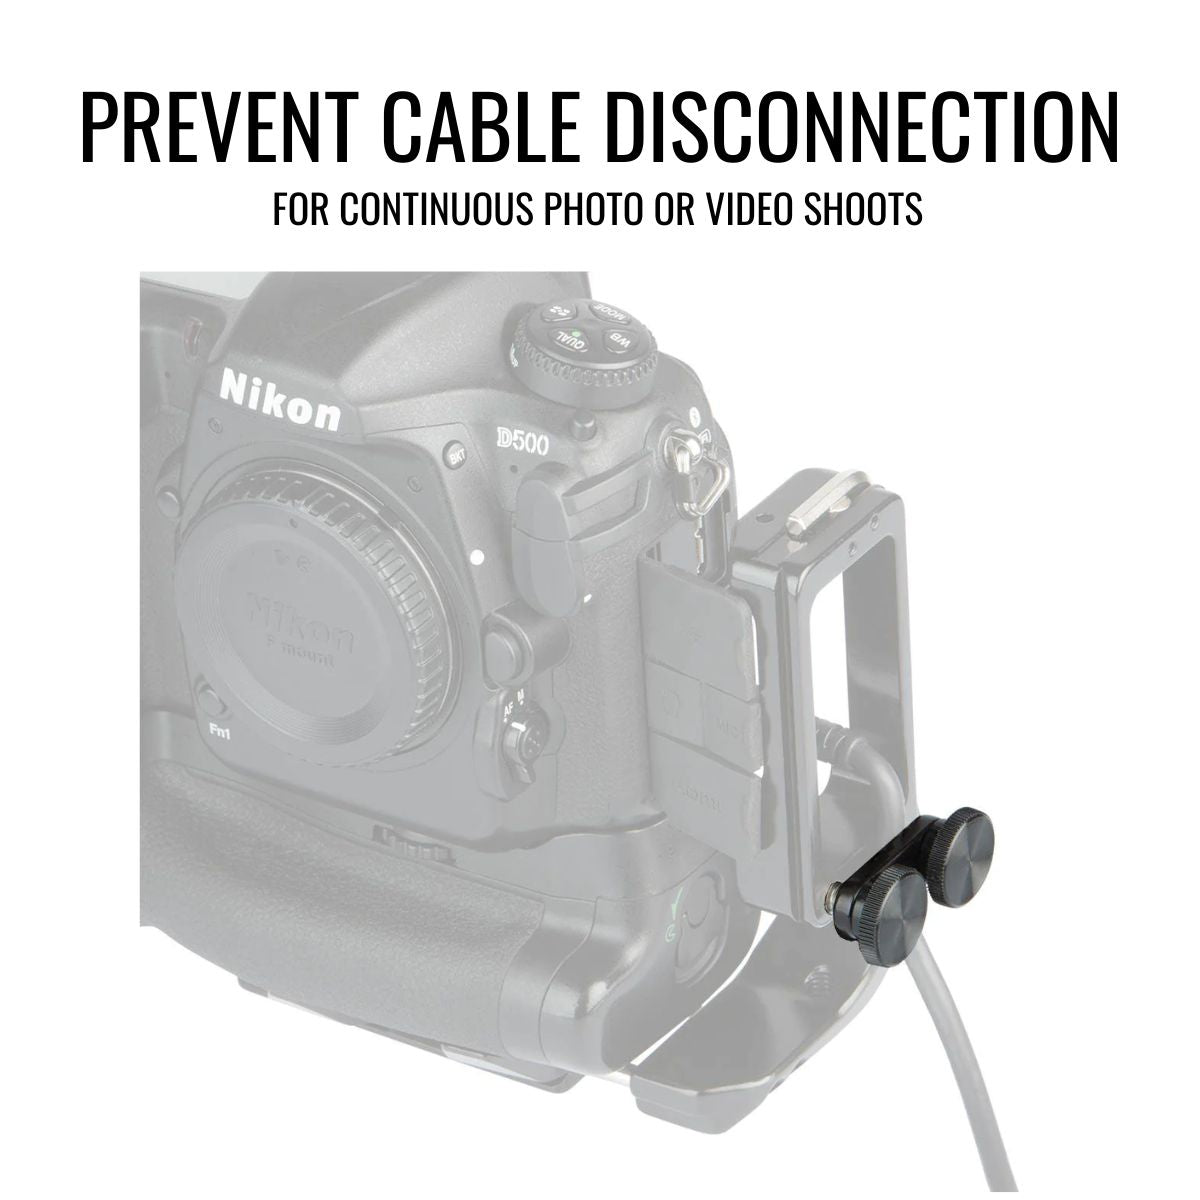 Prevent cable disconnection with the A10 cable port protector